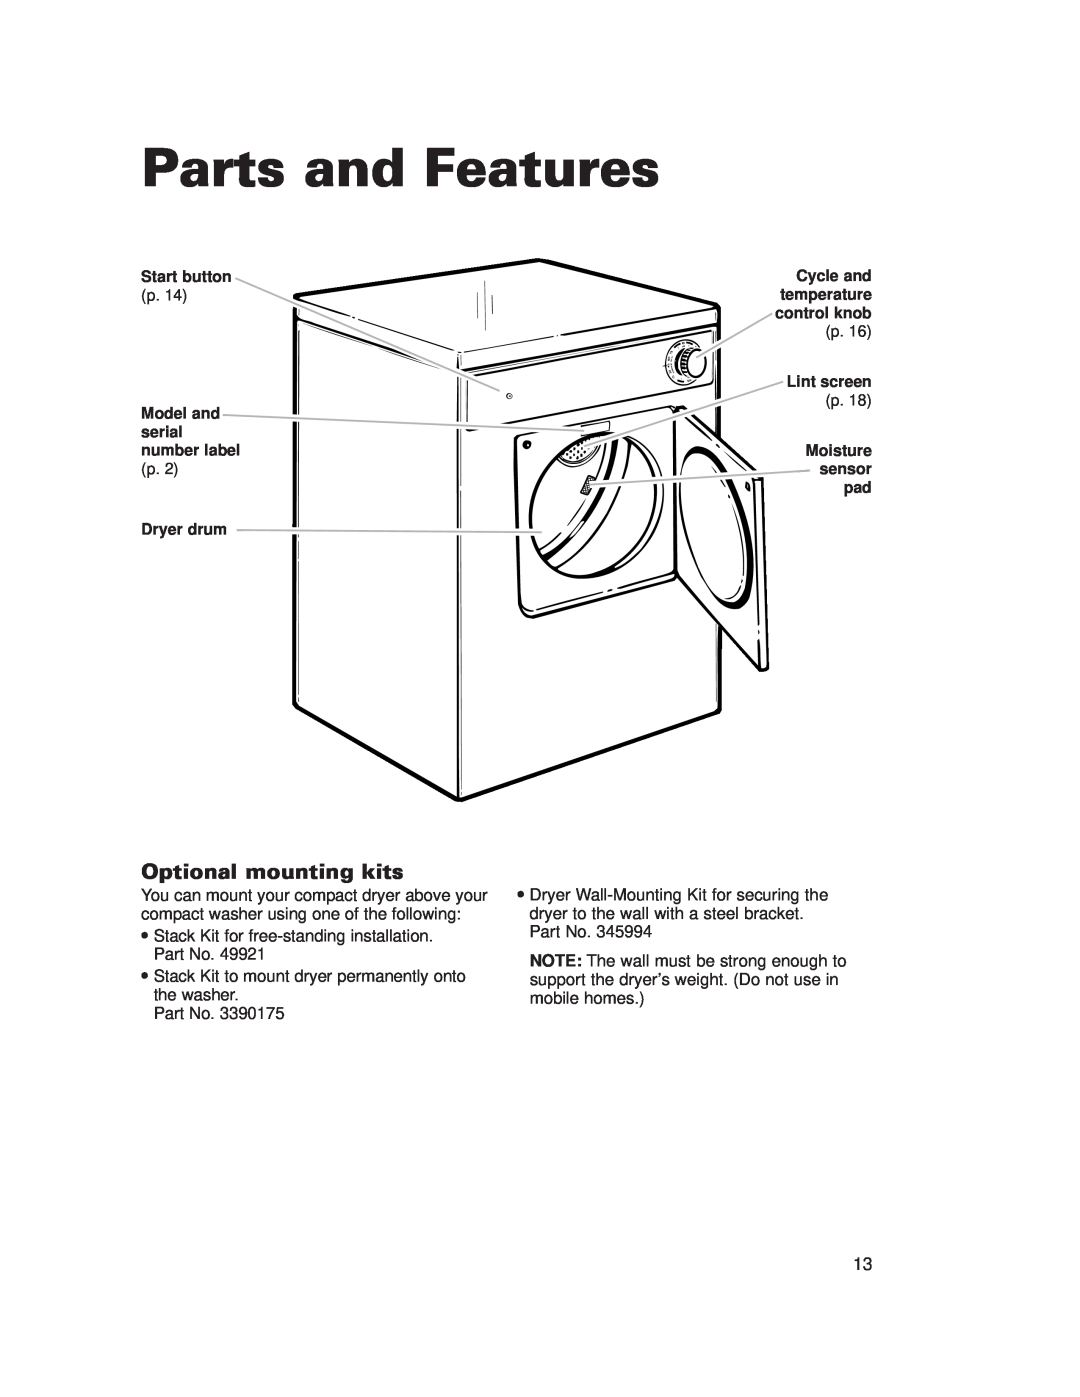 Whirlpool 3977631 installation instructions Parts and Features, Optional mounting kits 